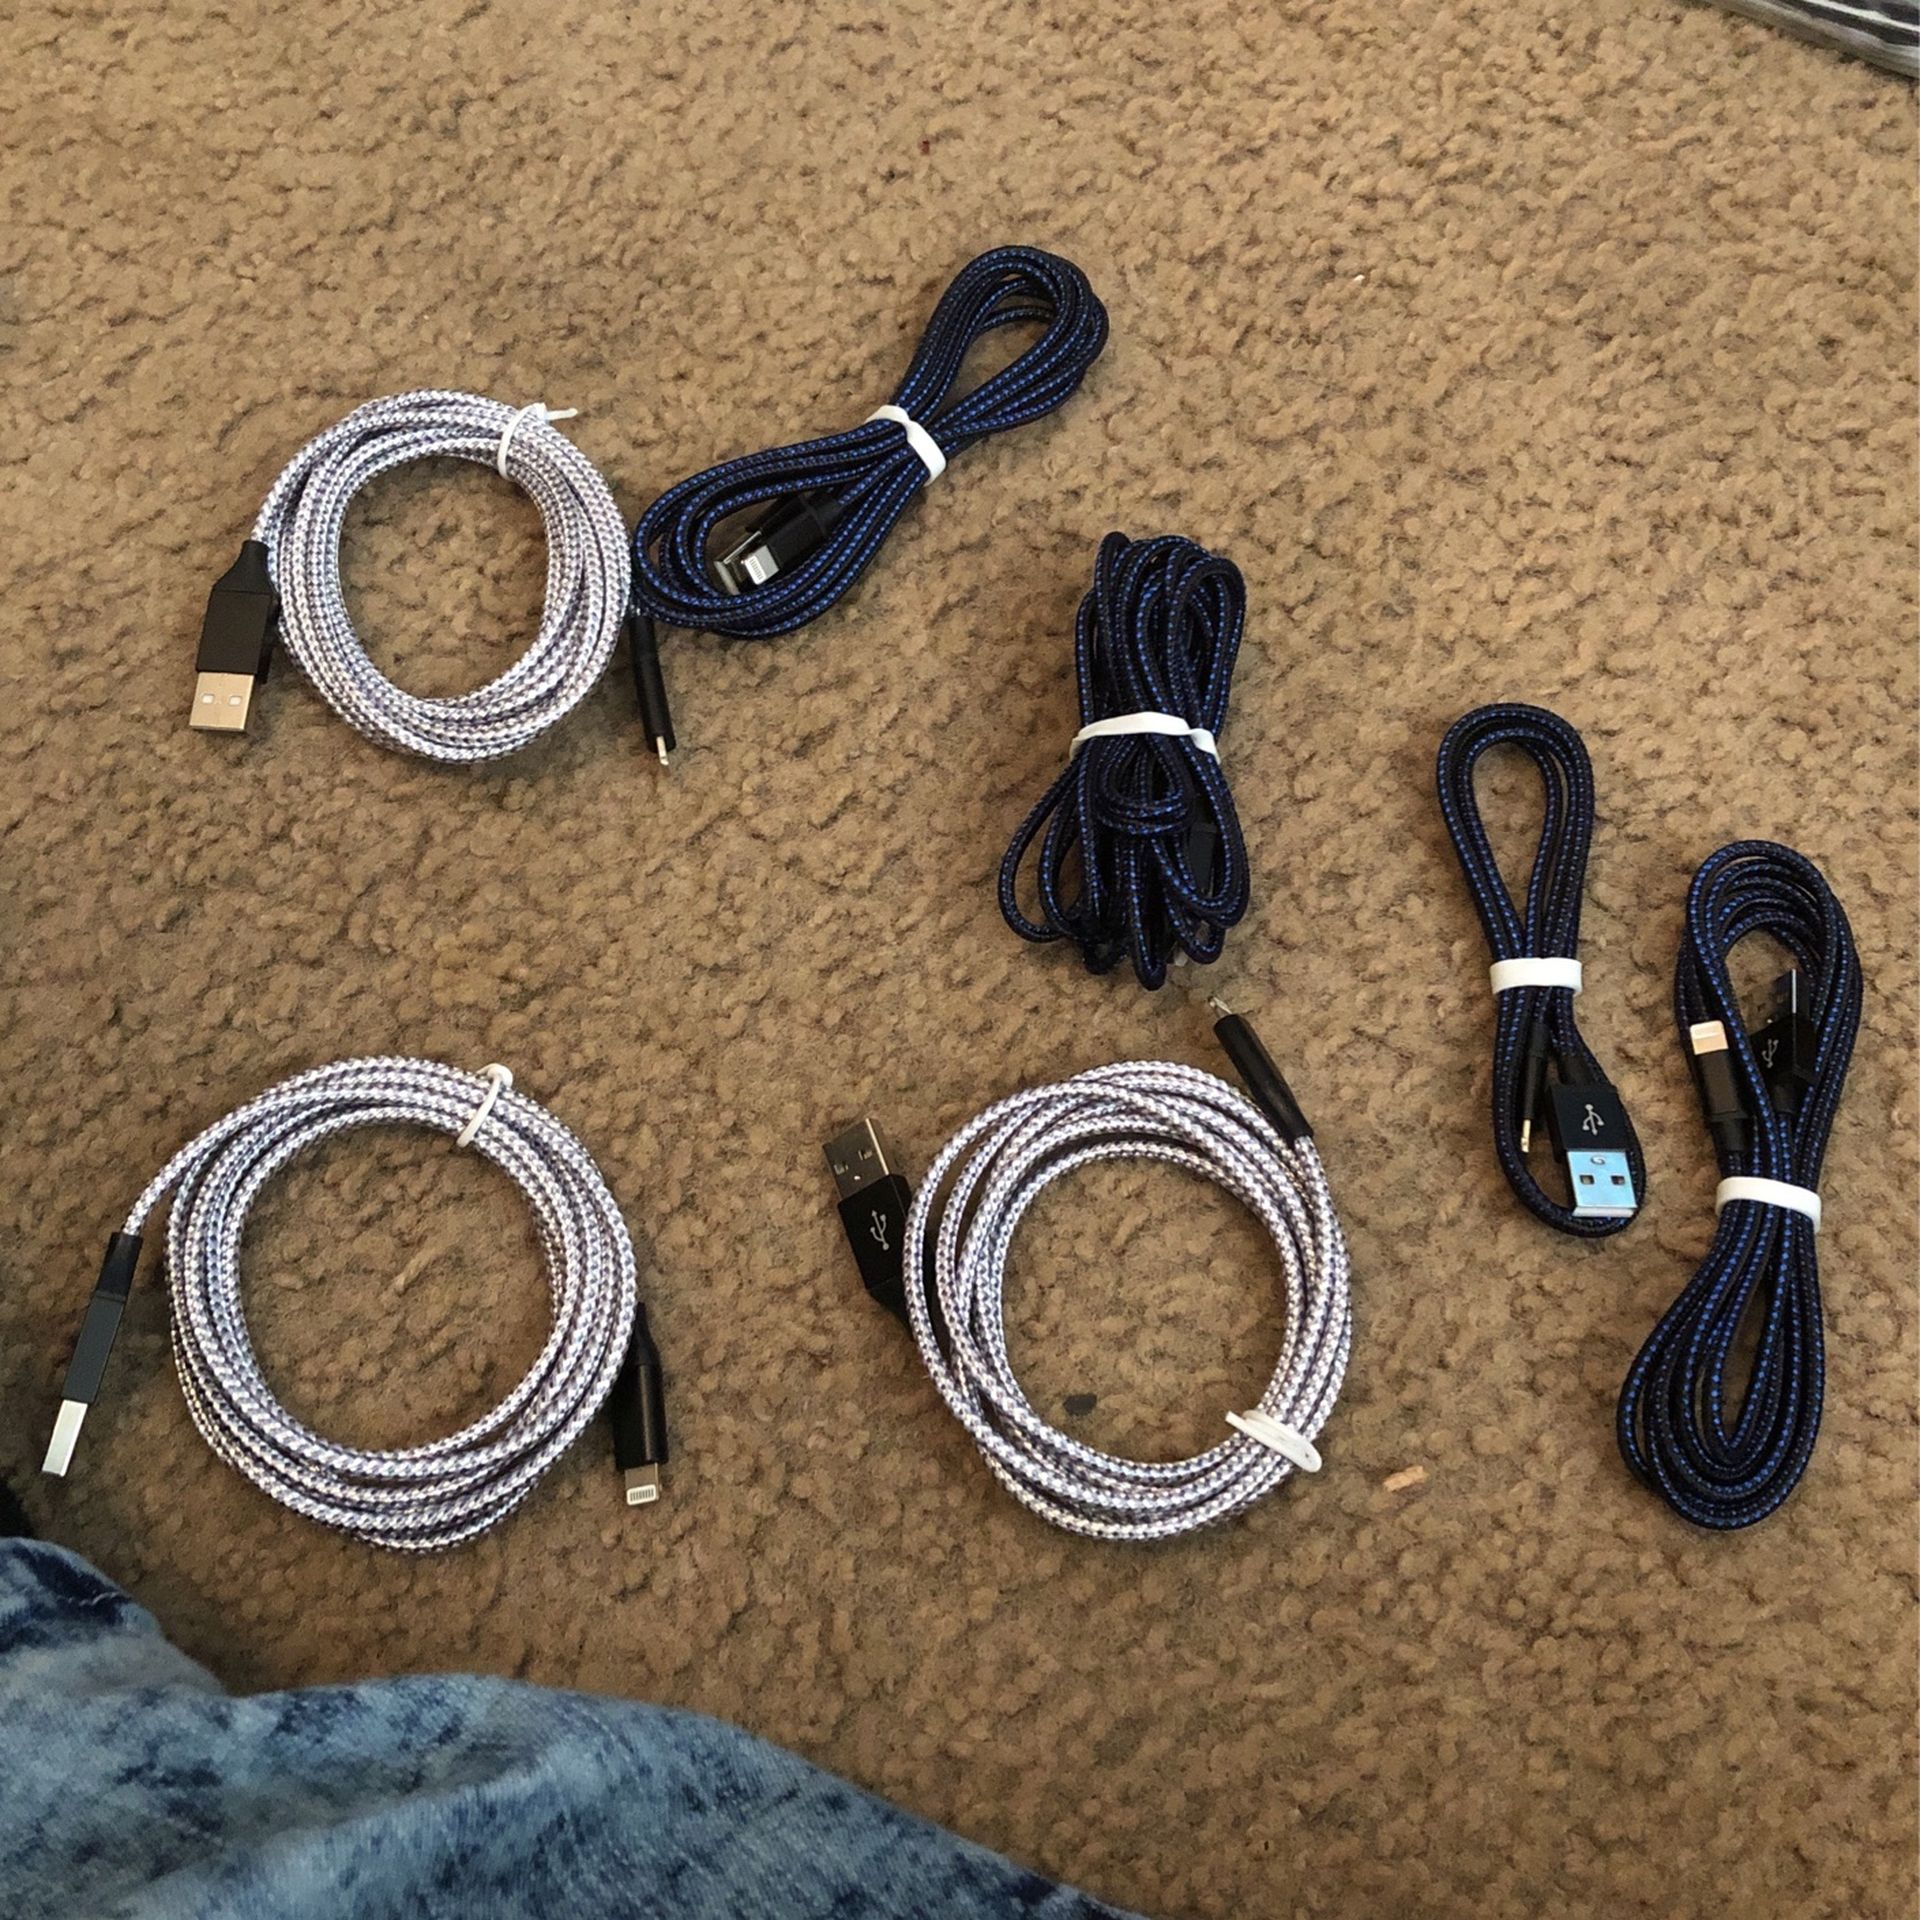 7 feet iPhone chargers Six dollars each